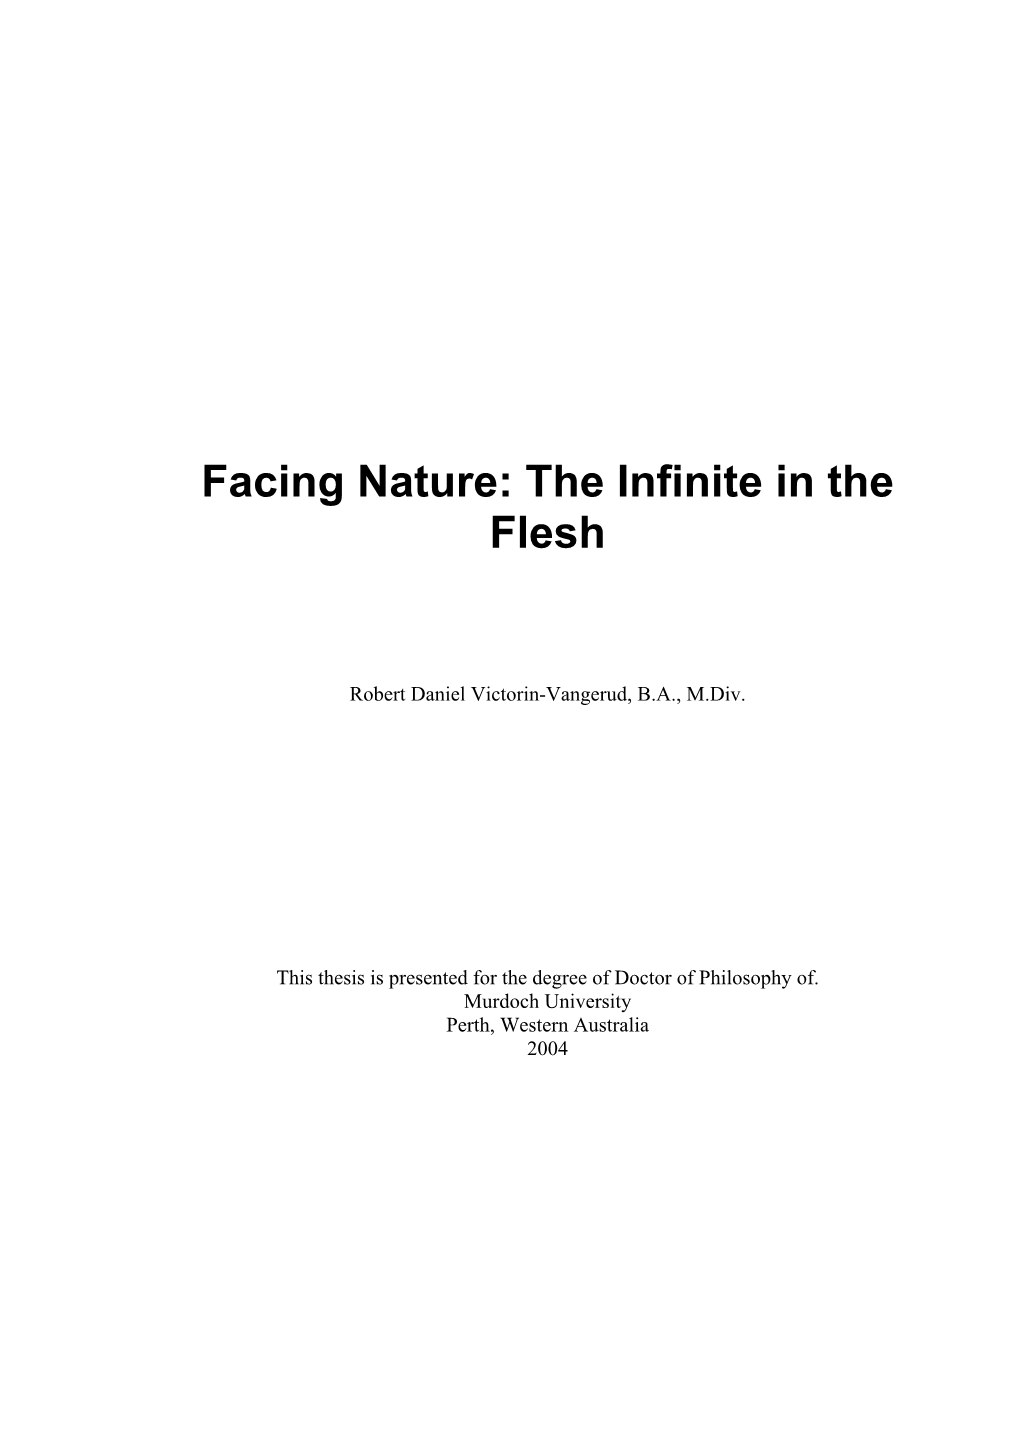 Facing Nature: the Infinite in the Flesh